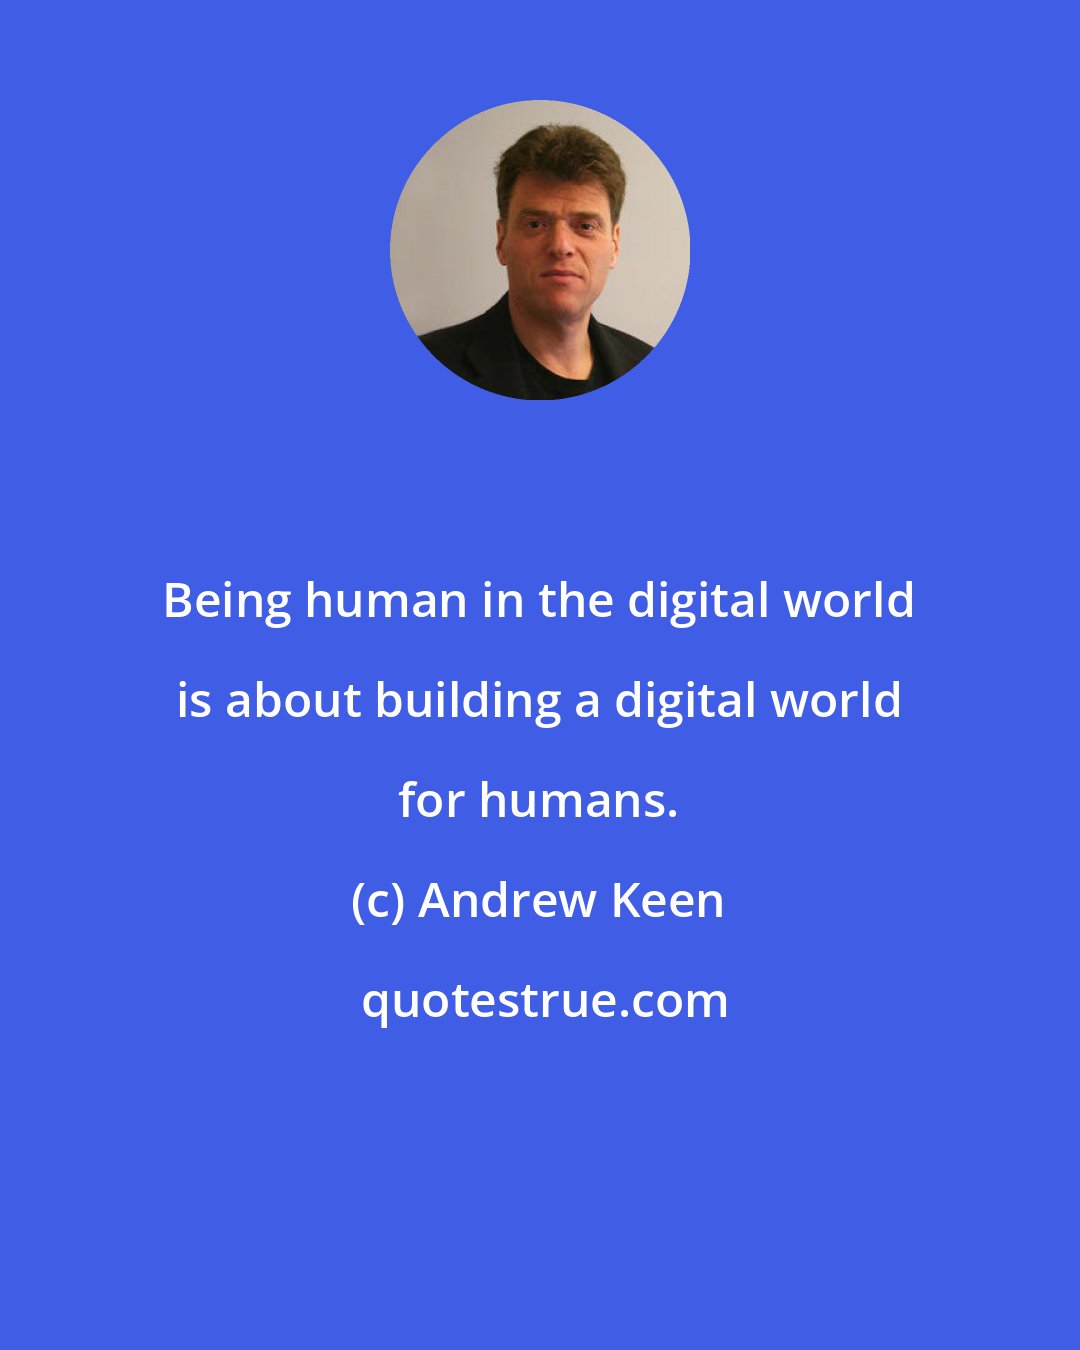 Andrew Keen: Being human in the digital world is about building a digital world for humans.